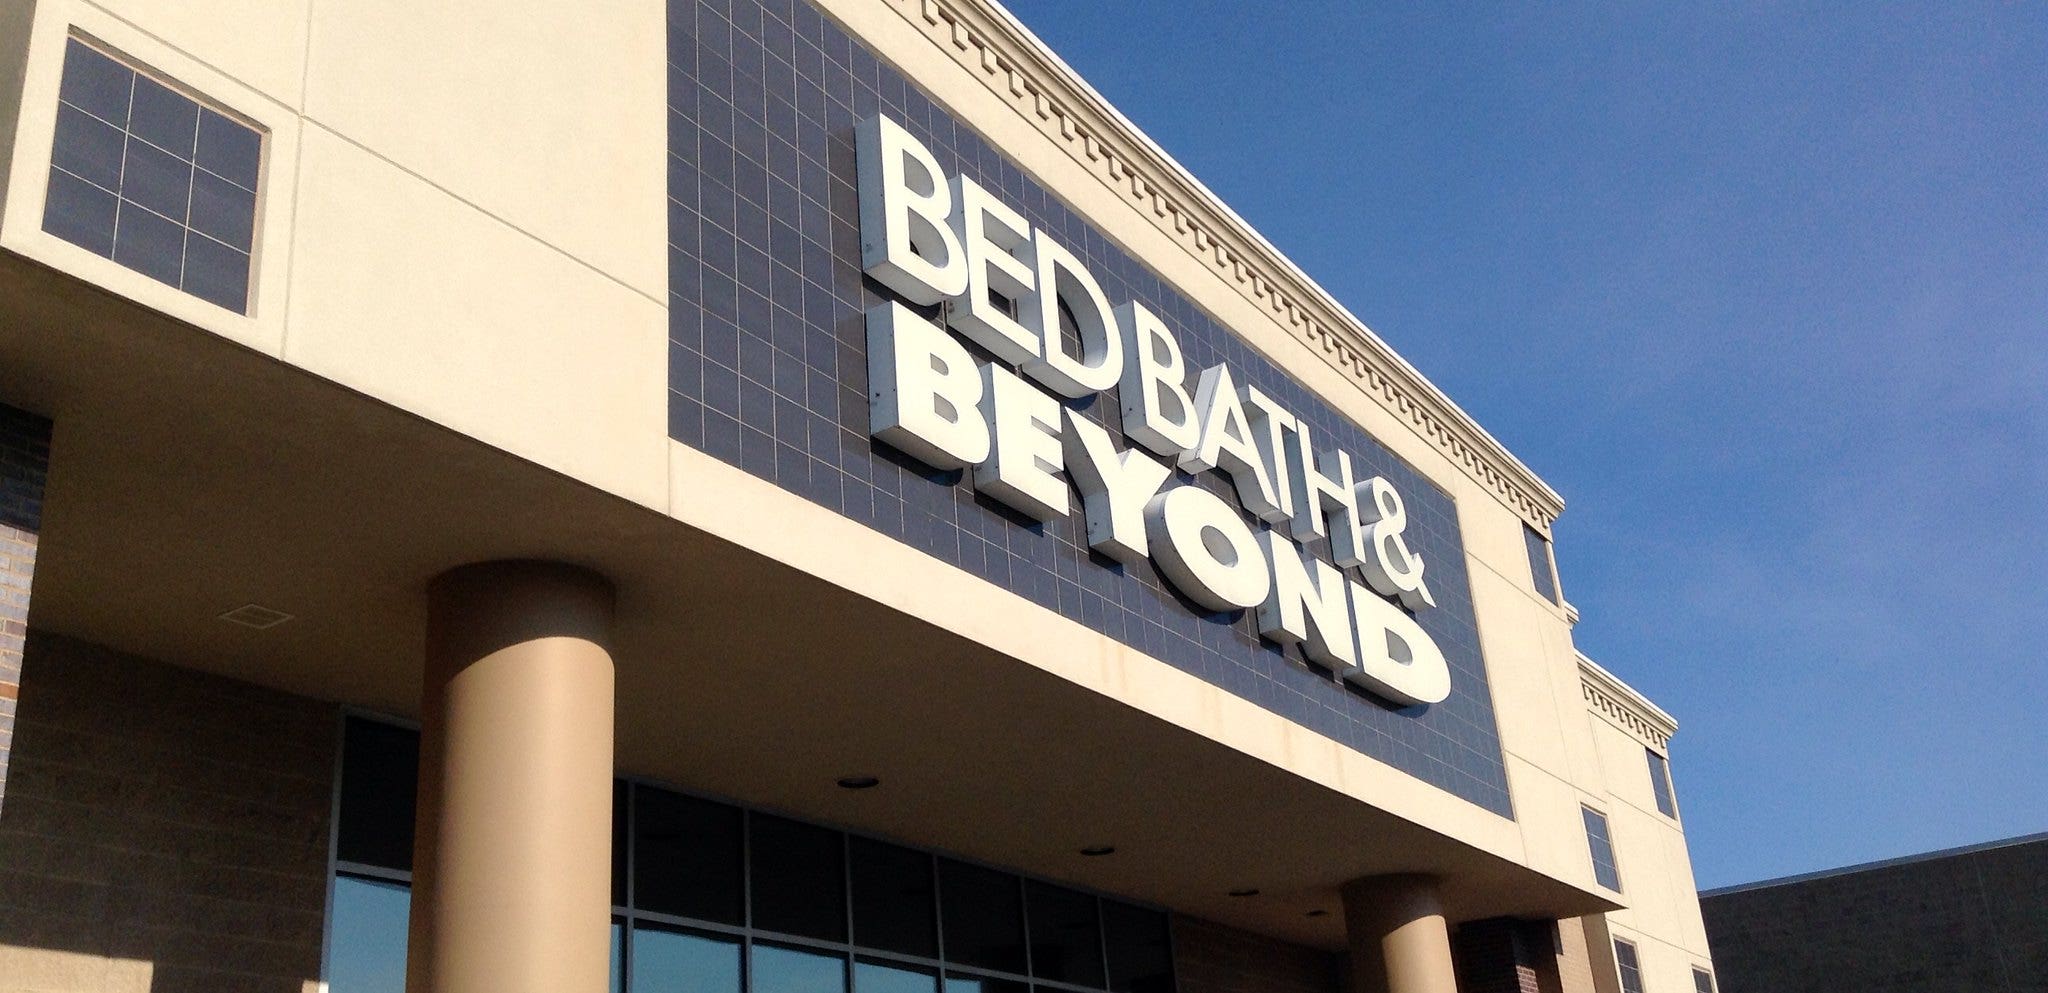 Why Is Bed Bath & Beyond Stock Tanking After Hours?